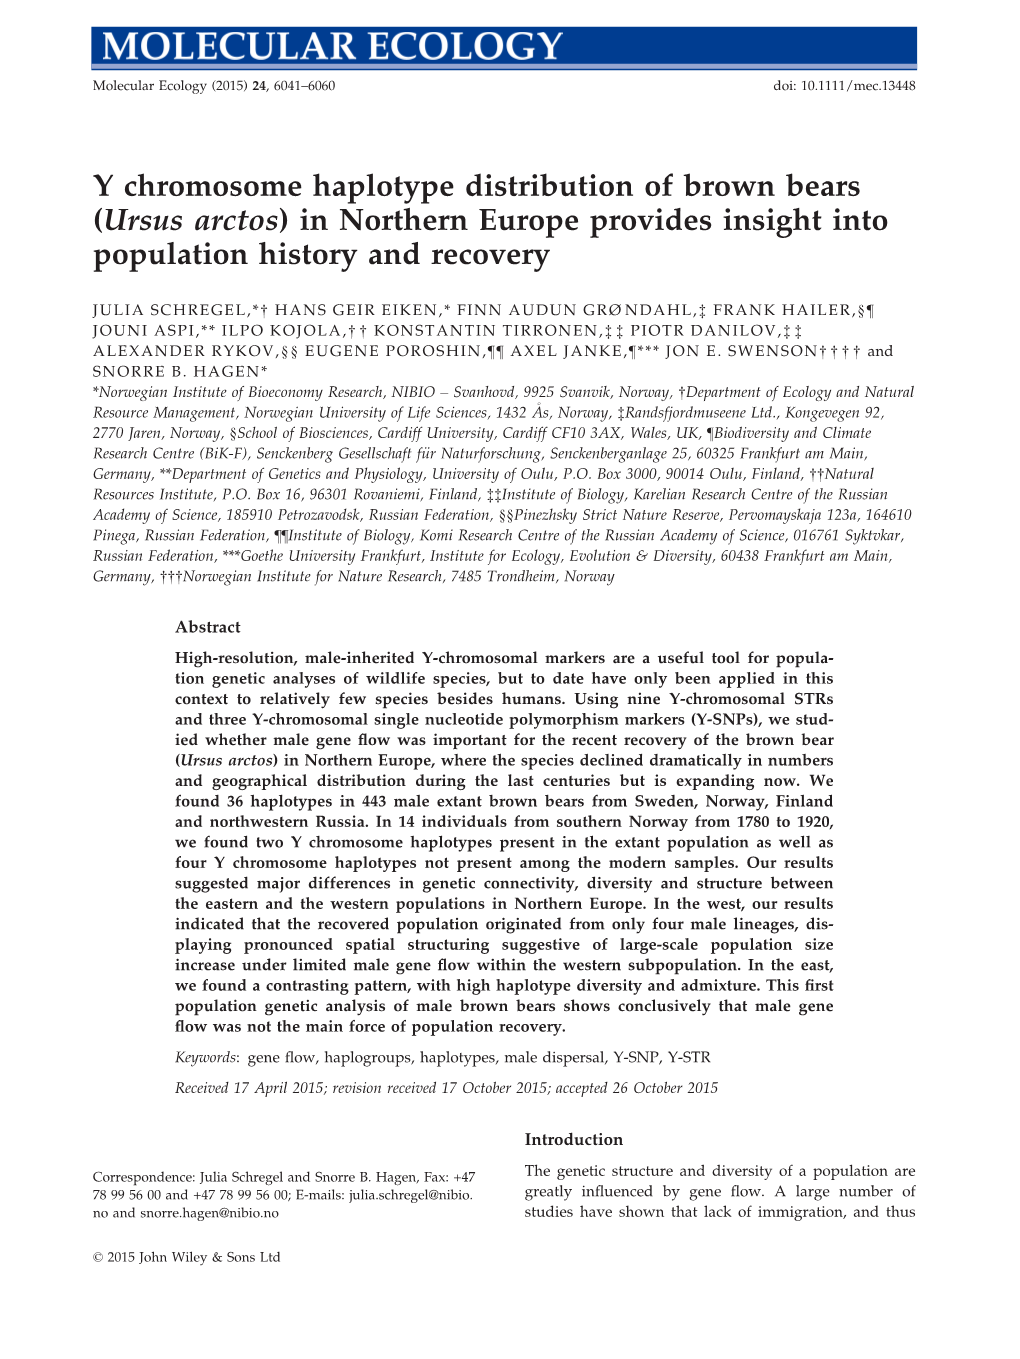 Y Chromosome Haplotype Distribution of Brown Bears (Ursus Arctos) in Northern Europe Provides Insight Into Population History and Recovery